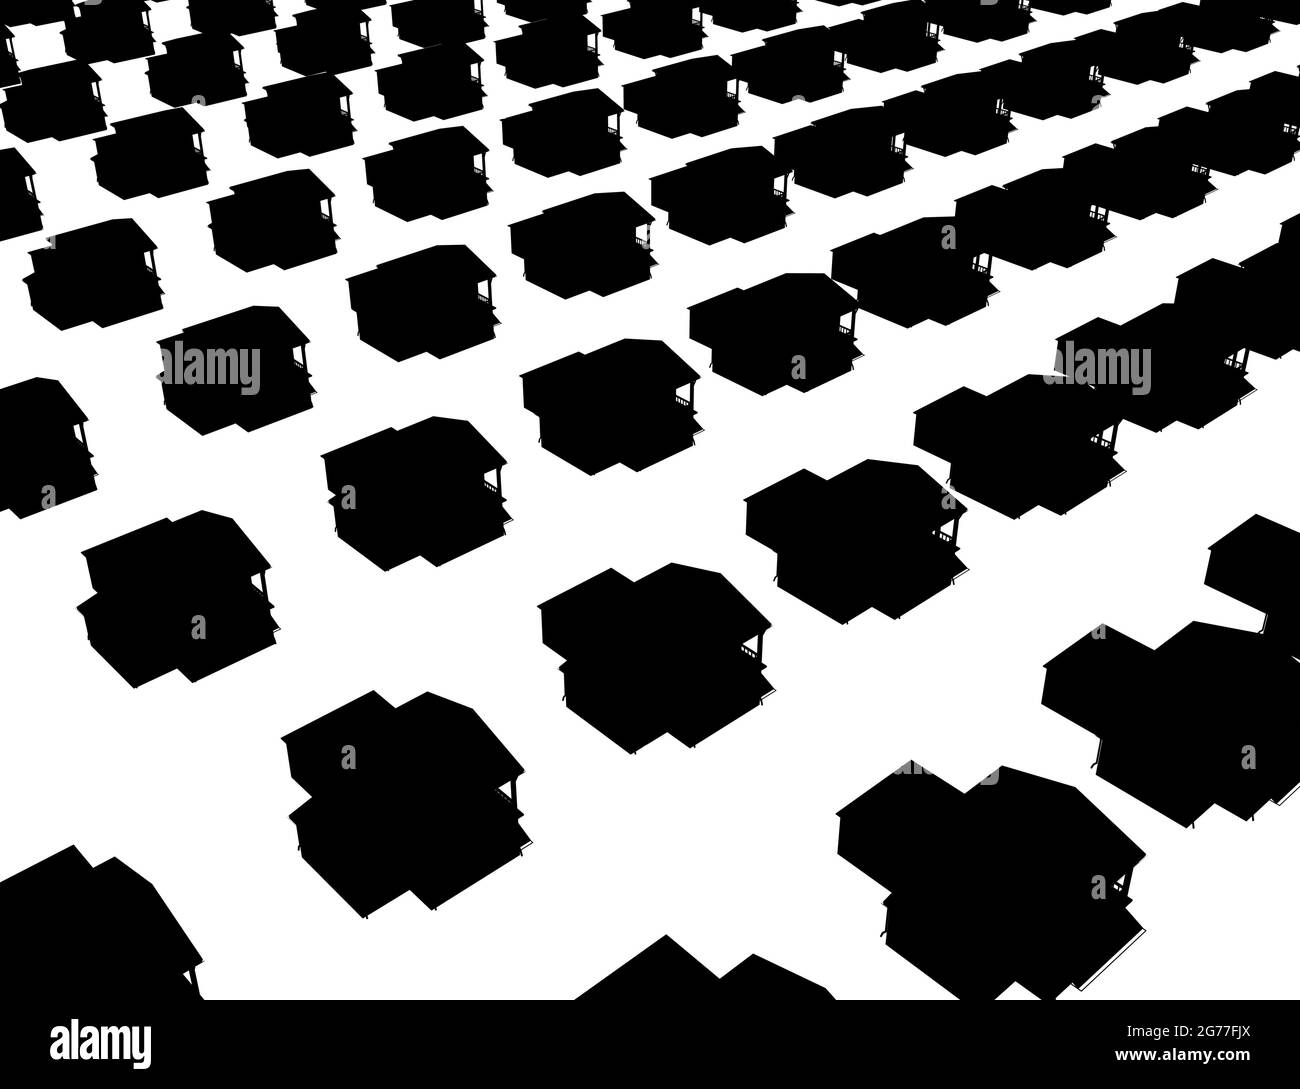 Background with silhouettes of private houses standing in a row isolated on white background. Isometric view. Vector illustration. Stock Vector